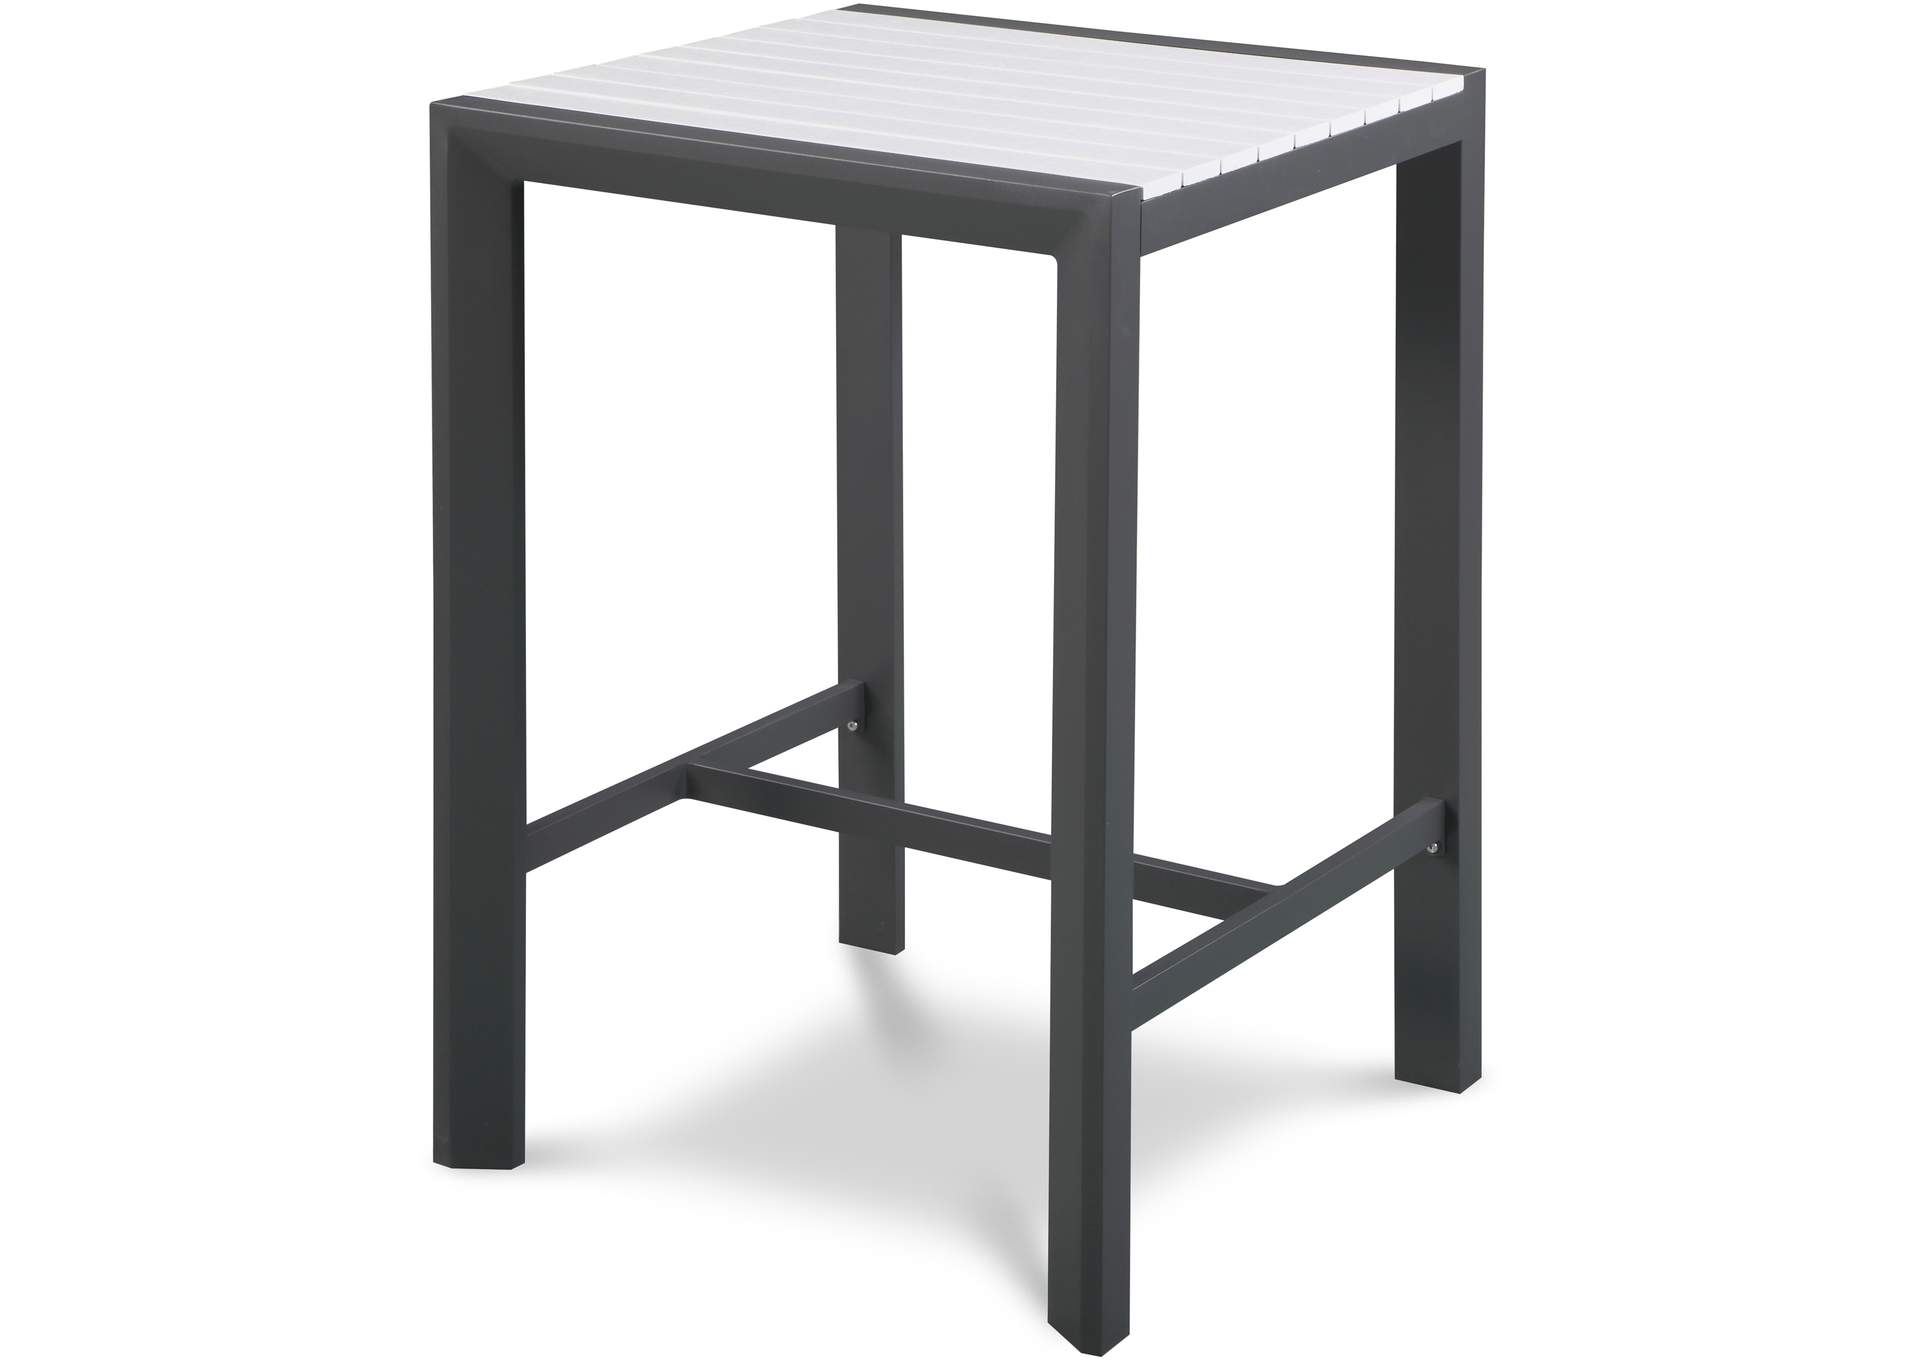 Nizuc White Wood Look Accent Paneling Outdoor Patio Aluminum Square Bar Table,Meridian Furniture